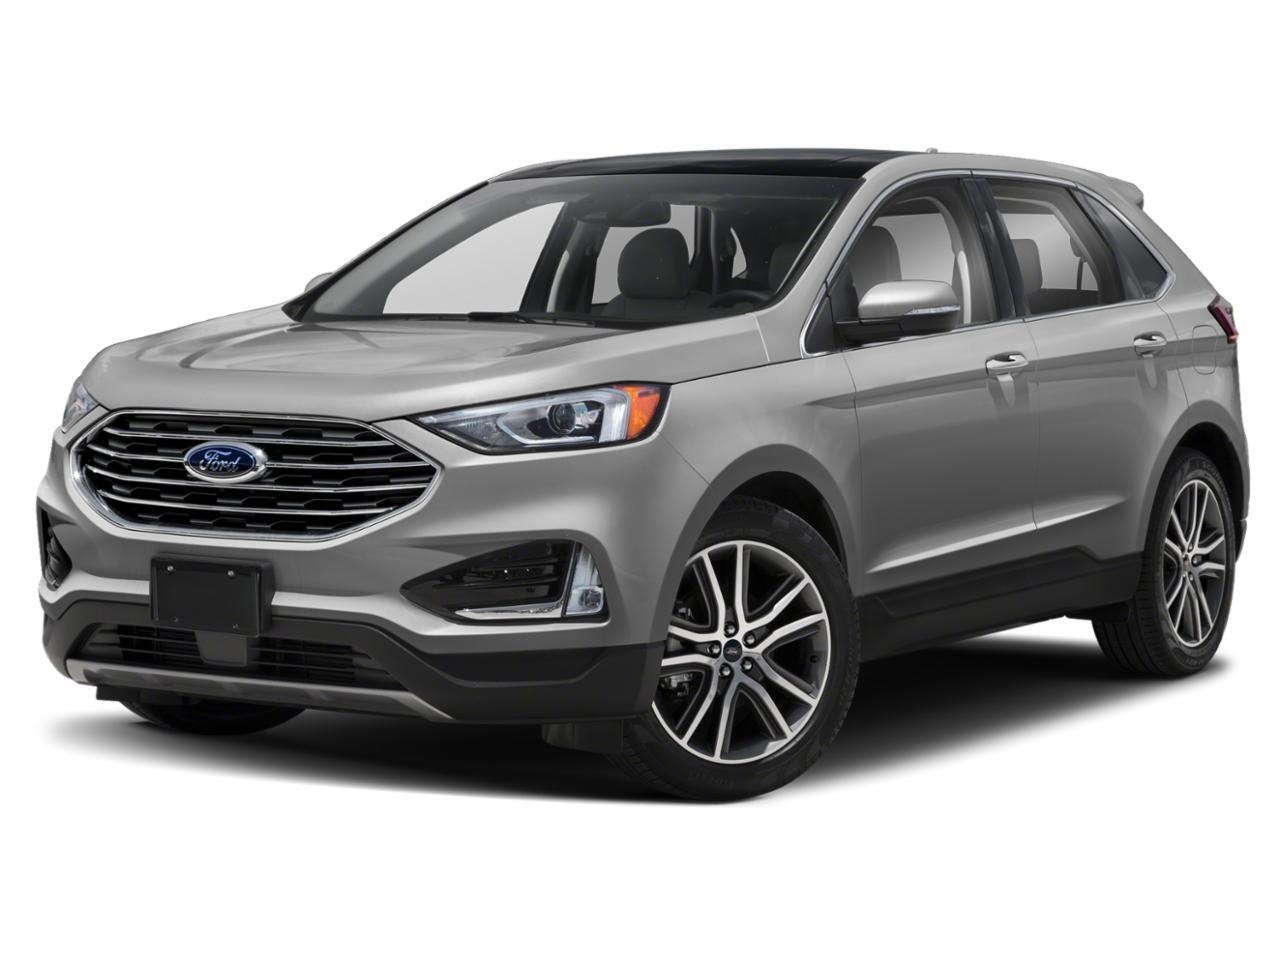 2019 Ford Edge SEL IN SILVER METALLIC EQUIPPED WITH A 2.0L ECOBOO